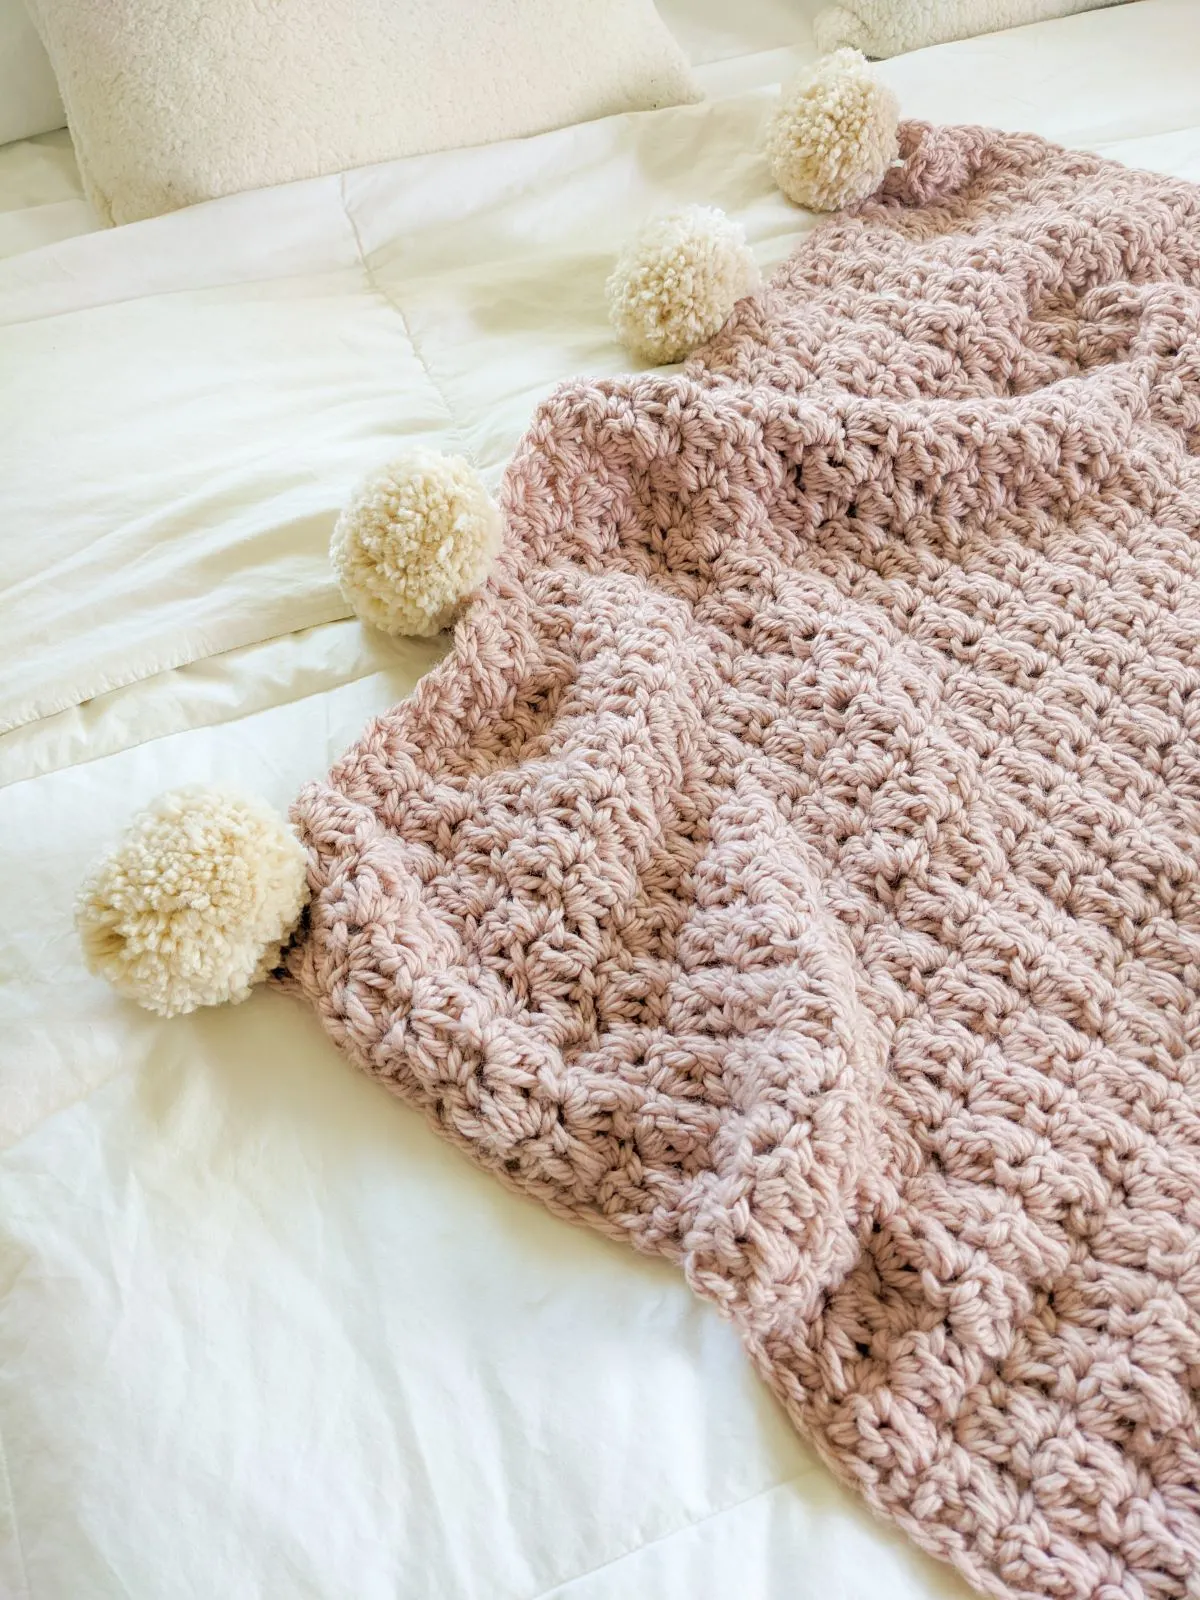 A crochet afghan made out of single crochet and double crochet.